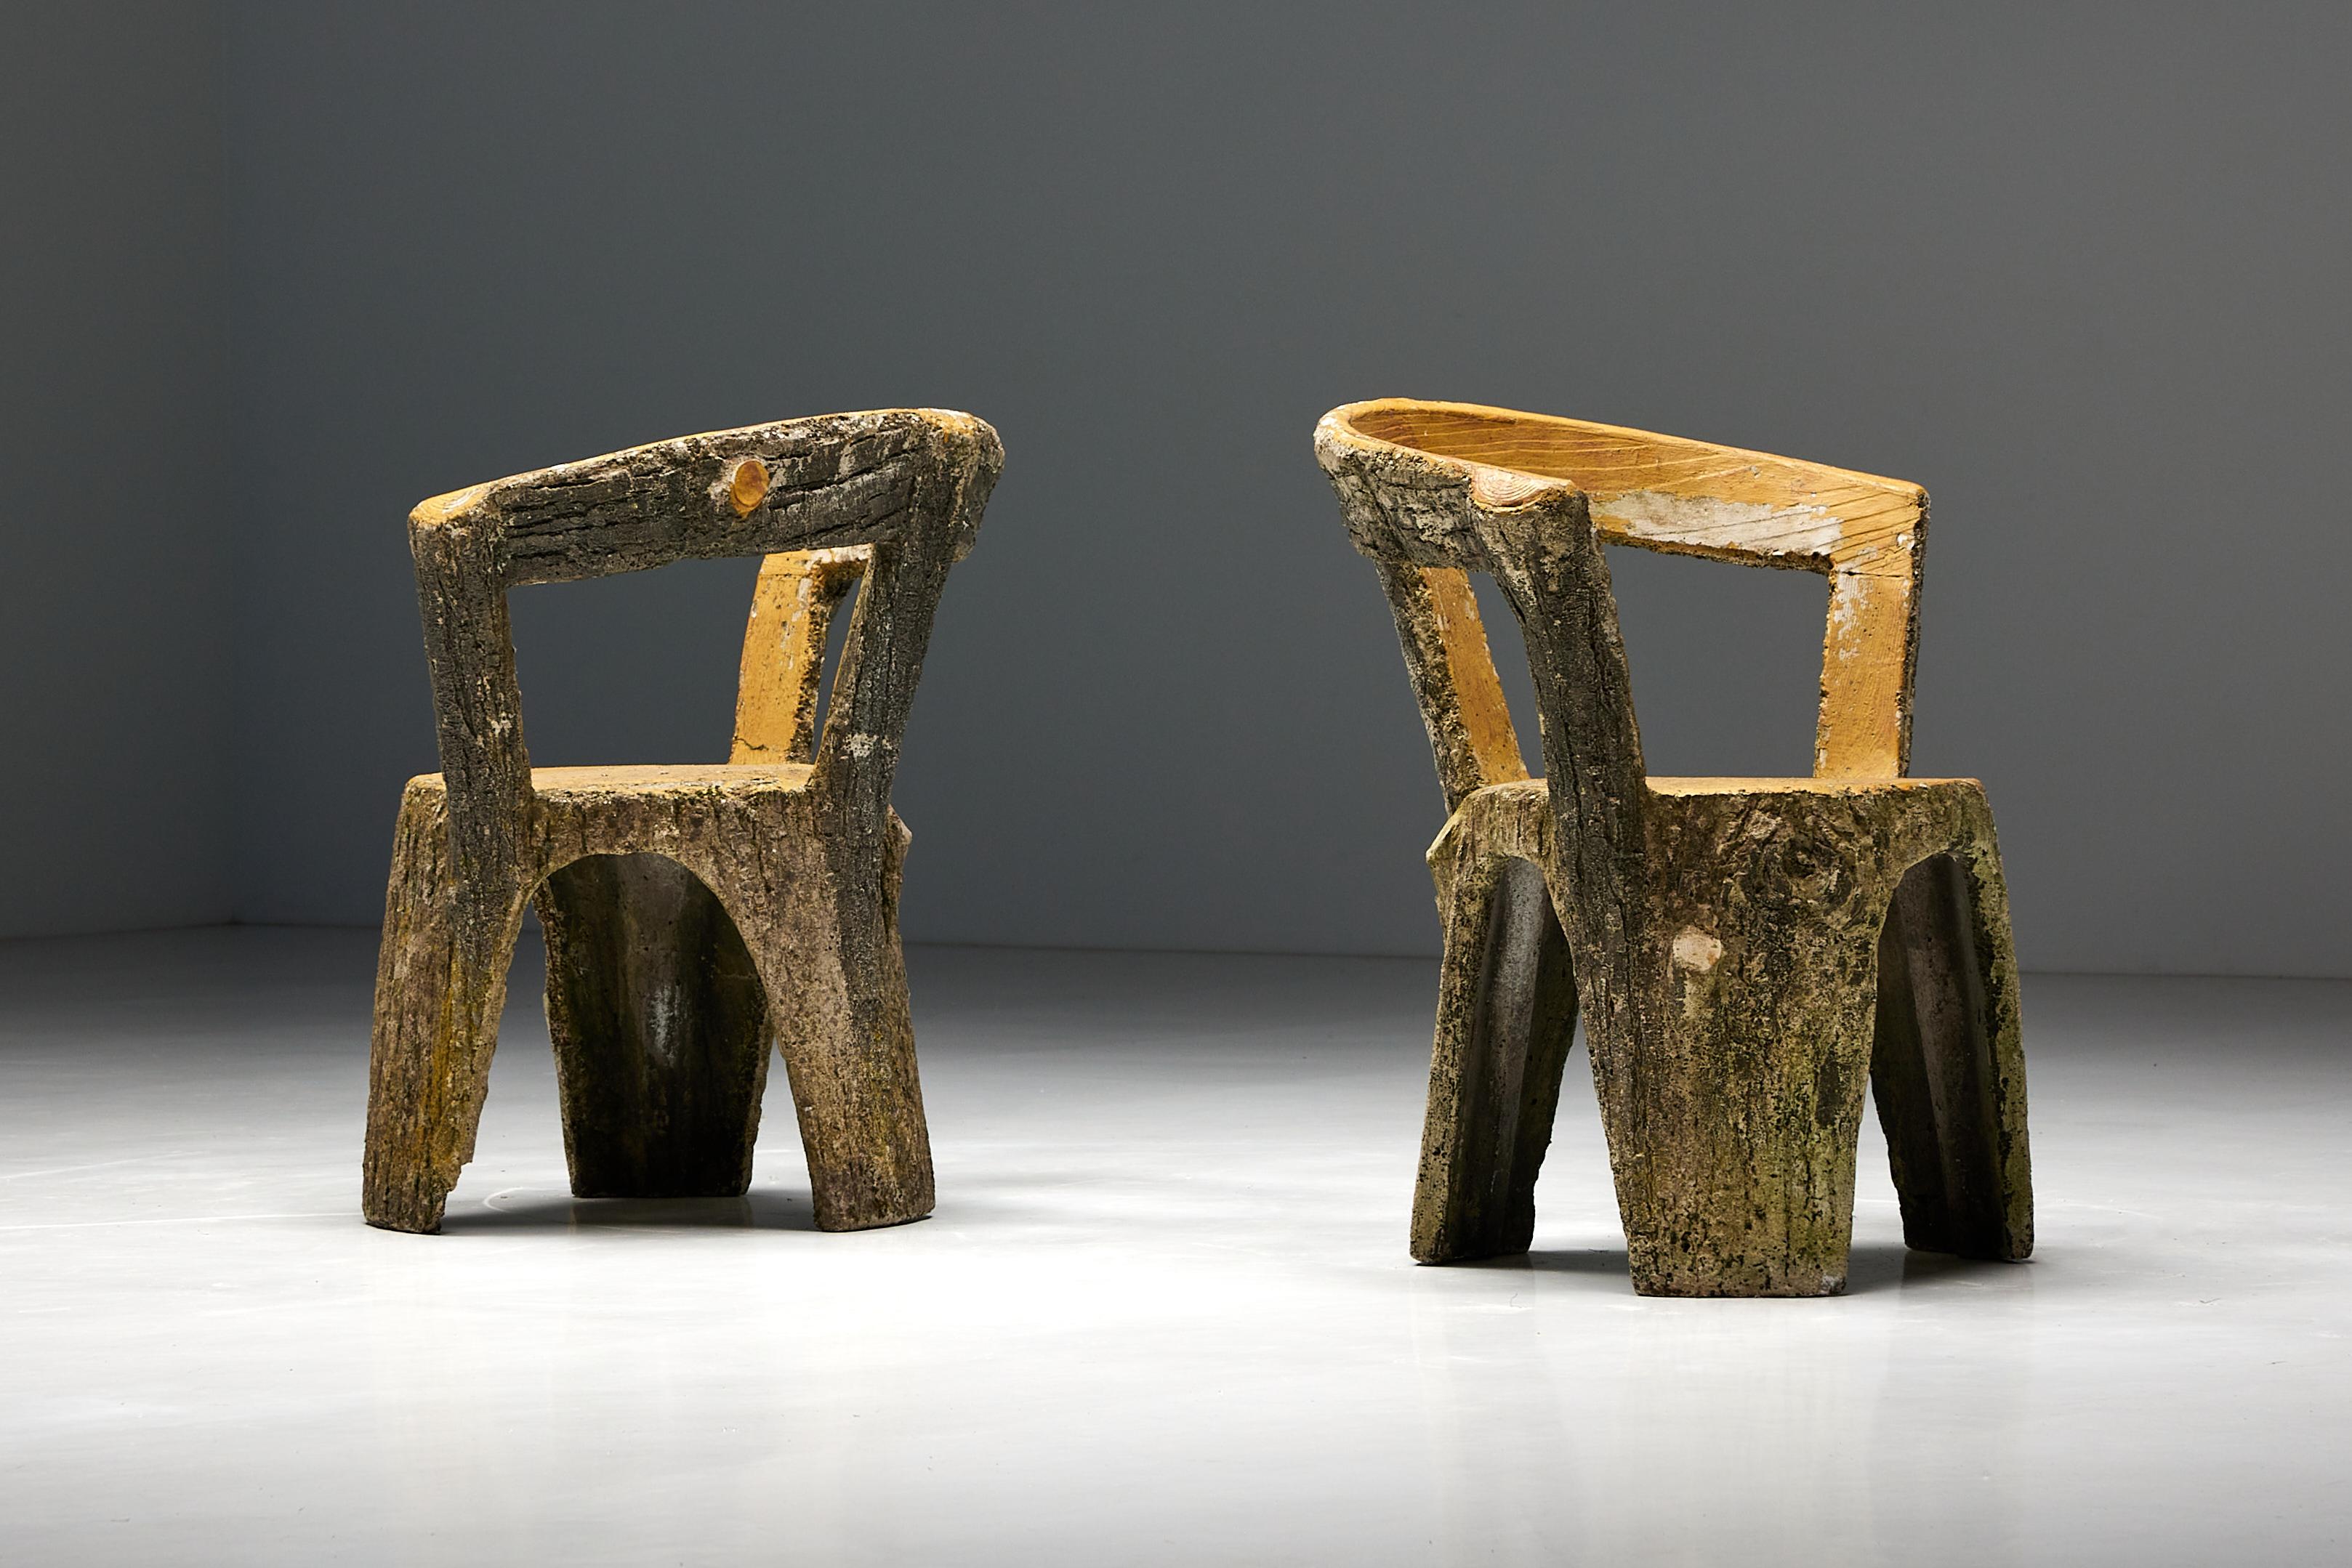 Concrete Armchair; Brutalist; Outdoor Seating; Stump Chair; Wood Concrete Look; Faux Bois; Dining Chairs; 1970s; France.

Concrete chairs from 1970s France, designed with a remarkable twist - a stunning concrete finish that artfully captures the